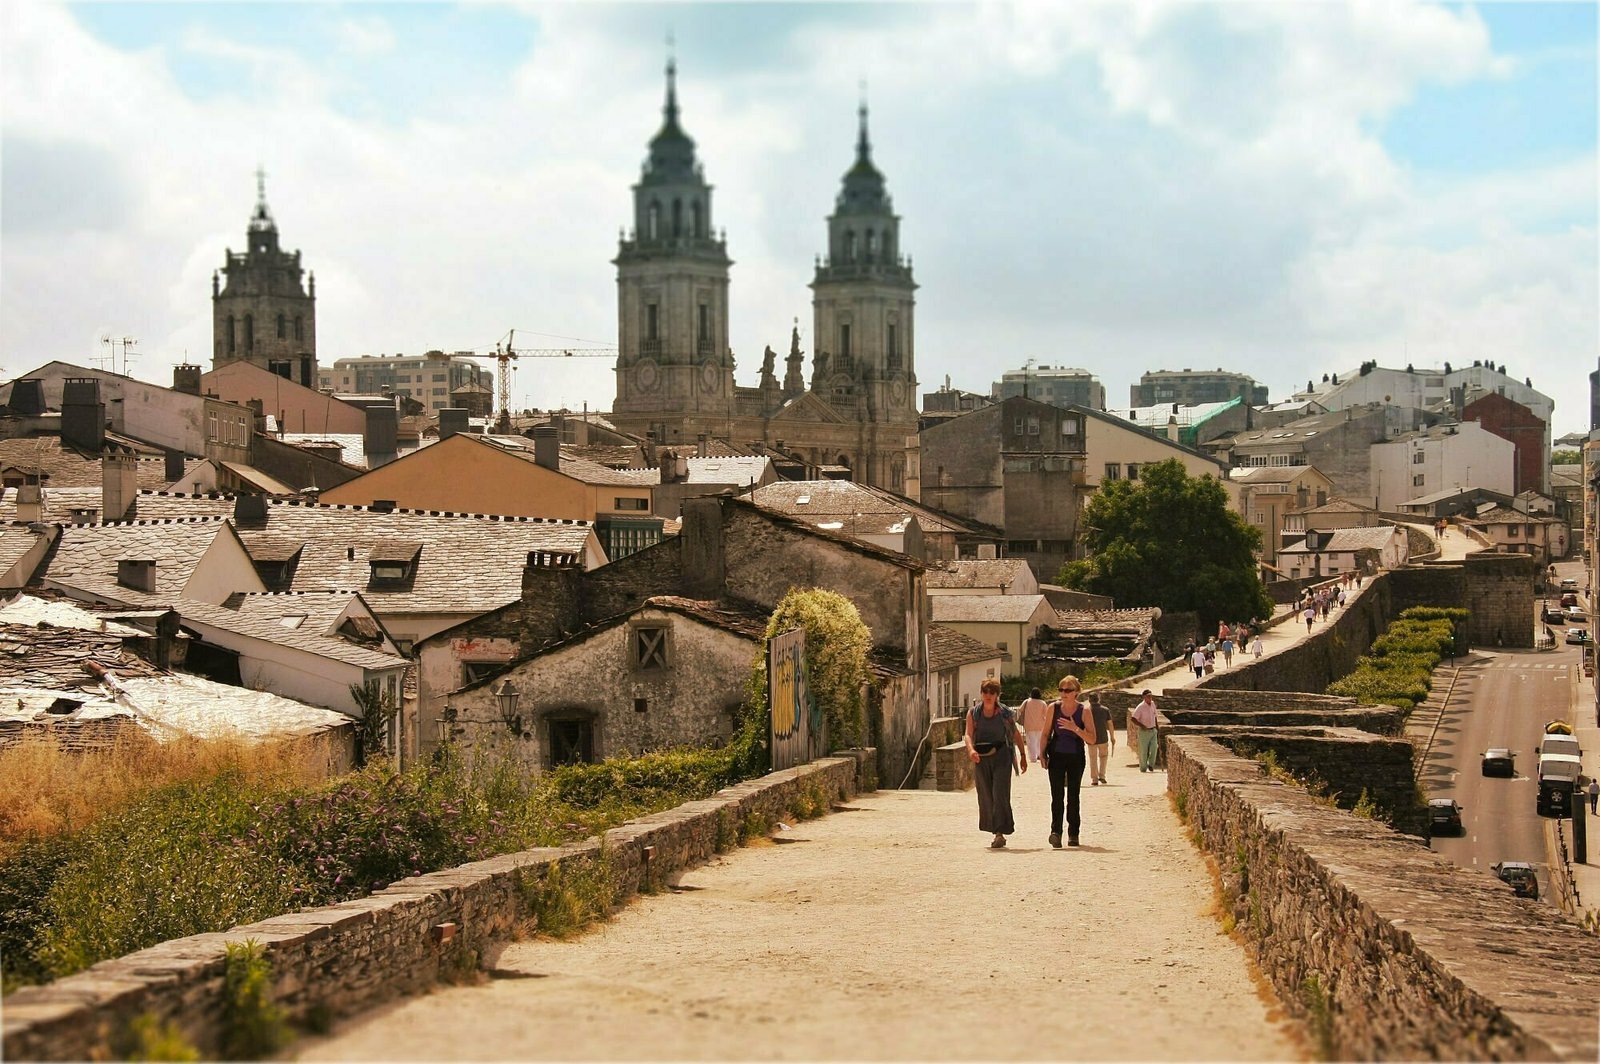 The roamn walled city of Lugo sits in the back ground with 2 spires rising into a blue sky from the cities cathedral.